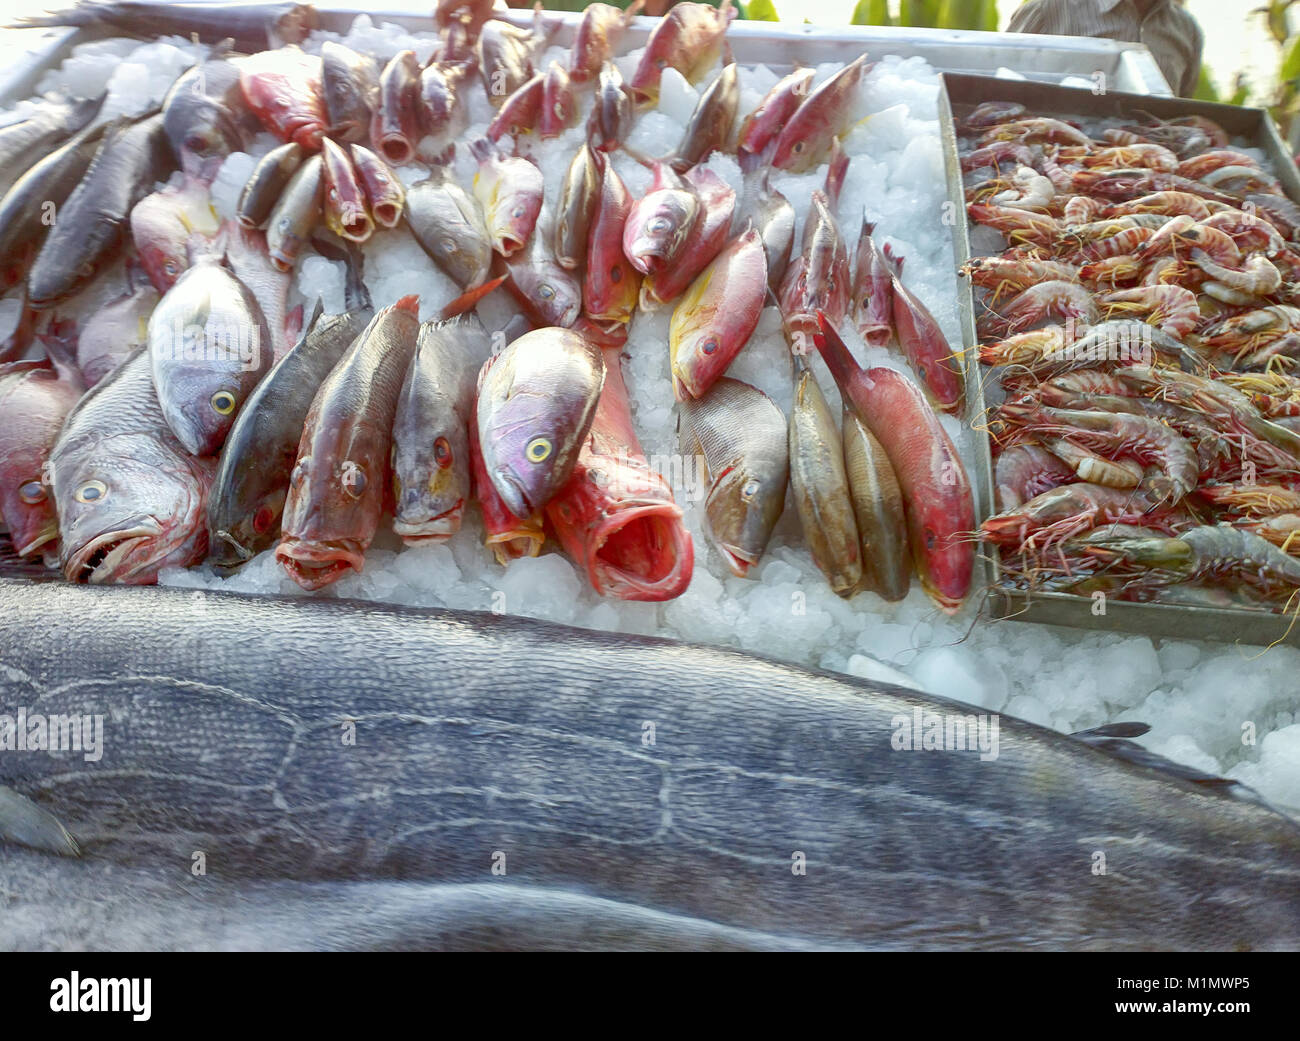 Street trading sea products, seafood, fruits de mer. On trays with ice bass, groupers, congers and large ocean shrimp from Indian ocean Stock Photo